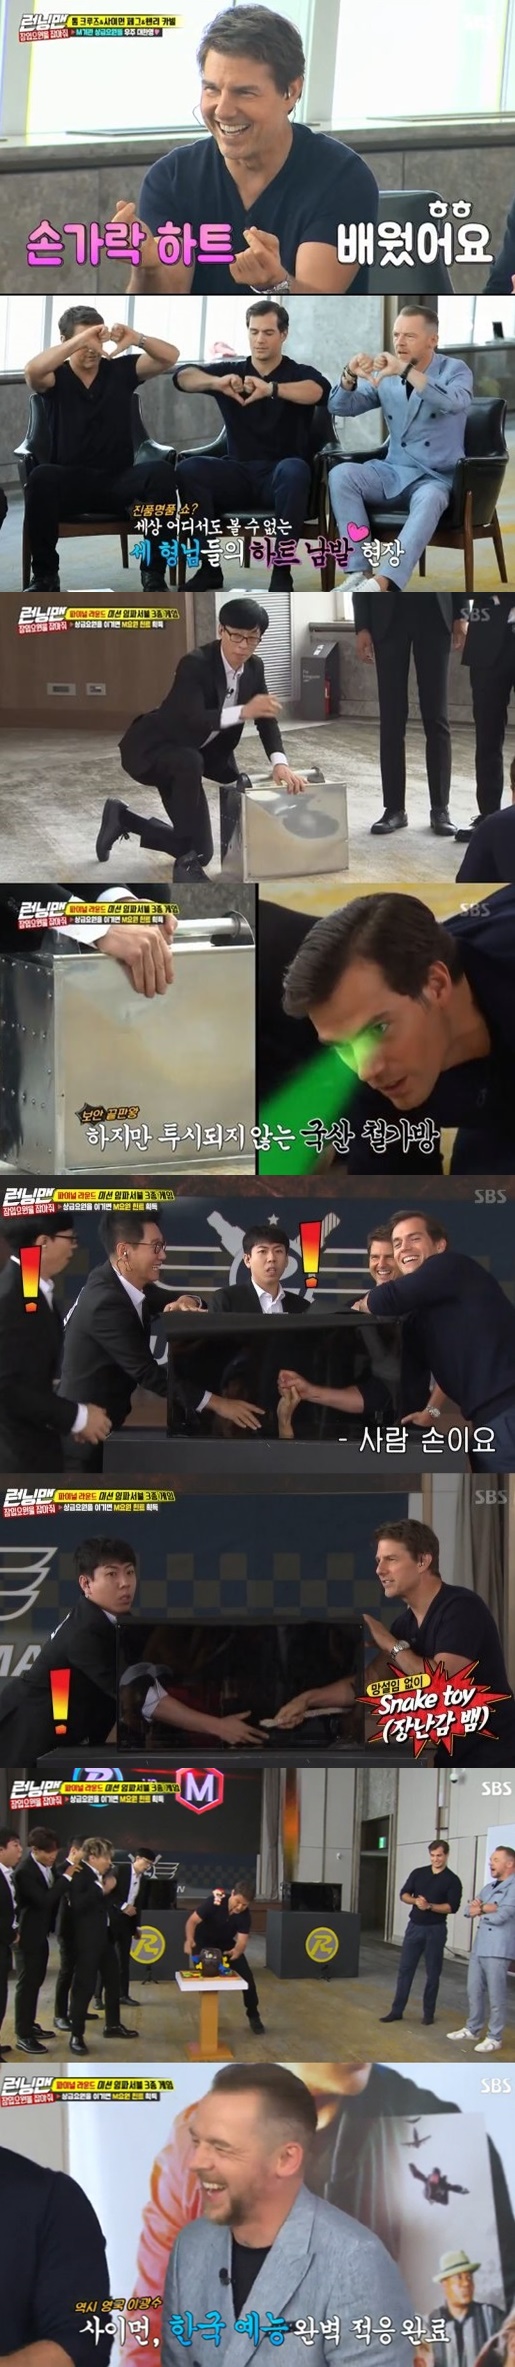 Running Man topped the entertainment ratings by breaking double-digit ratings with Tom Cruise, Henry Carville and Simon Pegg.According to Nielsen Korea, the ratings agency, Running Man, which aired on the 22nd, recorded an average audience rating of 7.1% and a second part of 10% (based on households in the Seoul metropolitan area), beating MBC Masked Wang (9.7%) and KBS2 Happy Sunday (8.2%).In particular, the double-digit ratings of Running Man are the second highest ratings this year in four months since March.In addition, the target audience rating of 20-49 years old (hereinafter referred to as 2049), which is considered an important indicator of major advertising officials, also soared to 5.7%, lightly beating Happy Sunday (4.1%) and Masked Wang (2.6%) which were broadcast on the same time zone.The figure is the record of the 2049 rating TOP 3 throughout the entertainment/culture program broadcast on the day.On the day of the show, Tom Cruise, Henry Carville and Simon Pegg, the actors of the movie Mission Impossible: Fall Out, which became a hot topic only with trailers, appeared in a surprise appearance.Hold me on to Project 2: Hold the infiltrators.Tom Cruise, who was the ninth to visit Korea, said, I am so glad to be able to come out of Running Man. Henry Carville, who visited Korea for the first time, said, I am so excited and excited.Thank you for inviting me. Simon Pegg also enthused the members of Running Man with his unexpected finger Heart A Tag, saying, Im enjoying this time for my second visit to Korea.Tom Cruise and Henry Carville also joined the Heart Attack and created various hearts and laughed.The final match between the members of Running Man and Mission Impossible was held. Although it was a limited recording time, the members of Mission surprised everyone with their game fighting.In the Iron Bag Quiz, he did not mind lying on the floor, he wrote Trick Operation, and he overpowered the Running Man members with his best efforts in every game.Tom Cruise played the game of Uncle Tong, up to 11.6%, and took the best one minute.Tom Cruise said, It was a really fun time.The members of Running Man are great, he said, and the members thanked the three actors for presenting the signature name tag of Running Man as a gift.Photo SBS Running Man